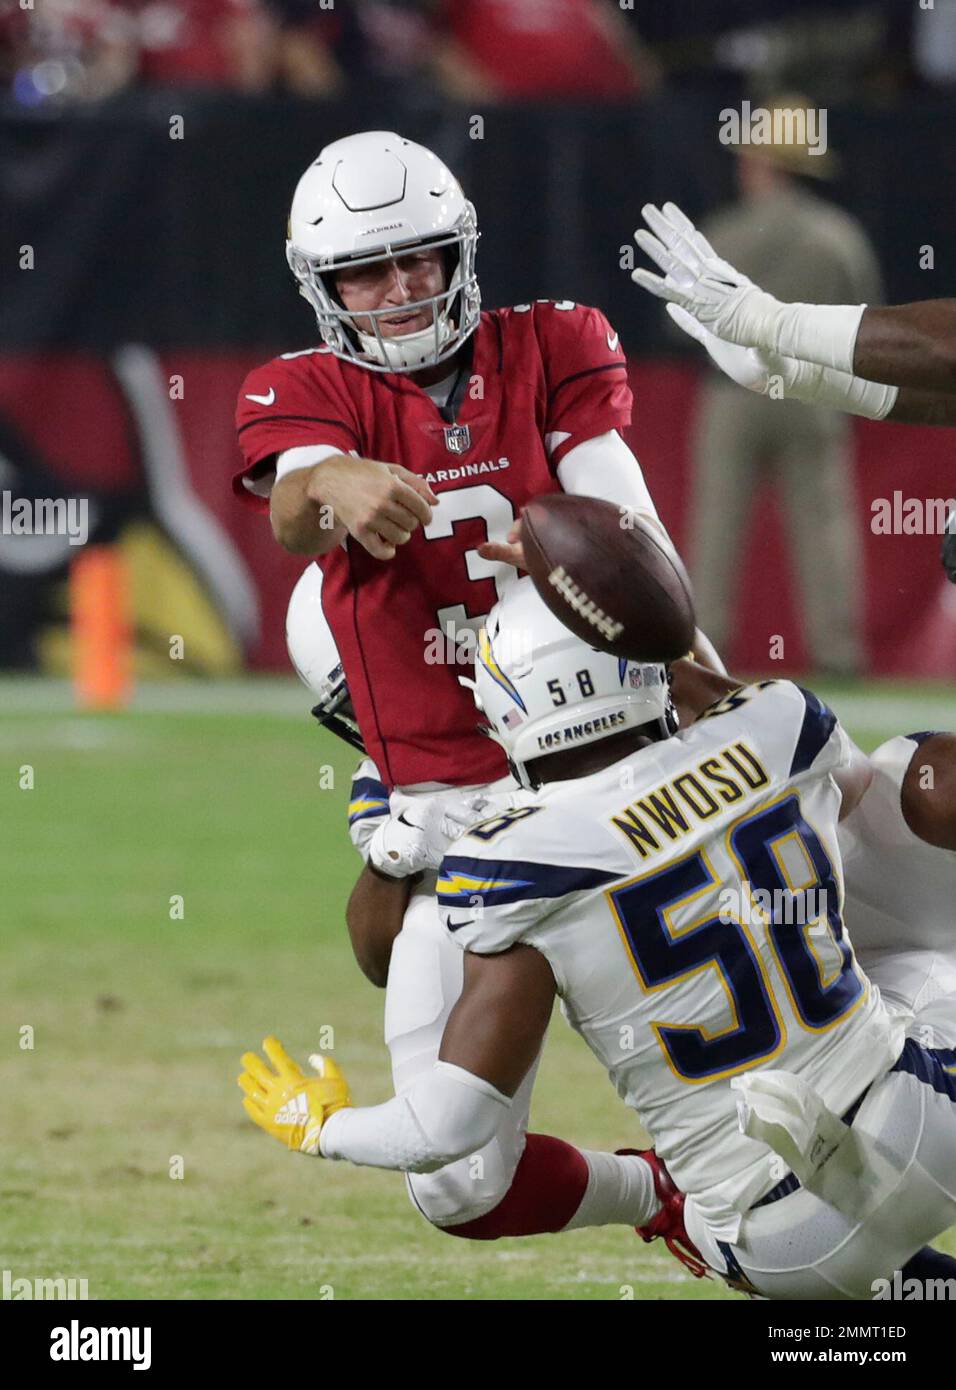 Arizona Cardinals quarterback Josh Rosen (3) during the first half of an preseason NFL football game against the Los Angeles Chargers, Saturday, Aug. 11, 2018, in Glendale, Ariz. (AP Photo/Rick Scuteri) Banque D'Images